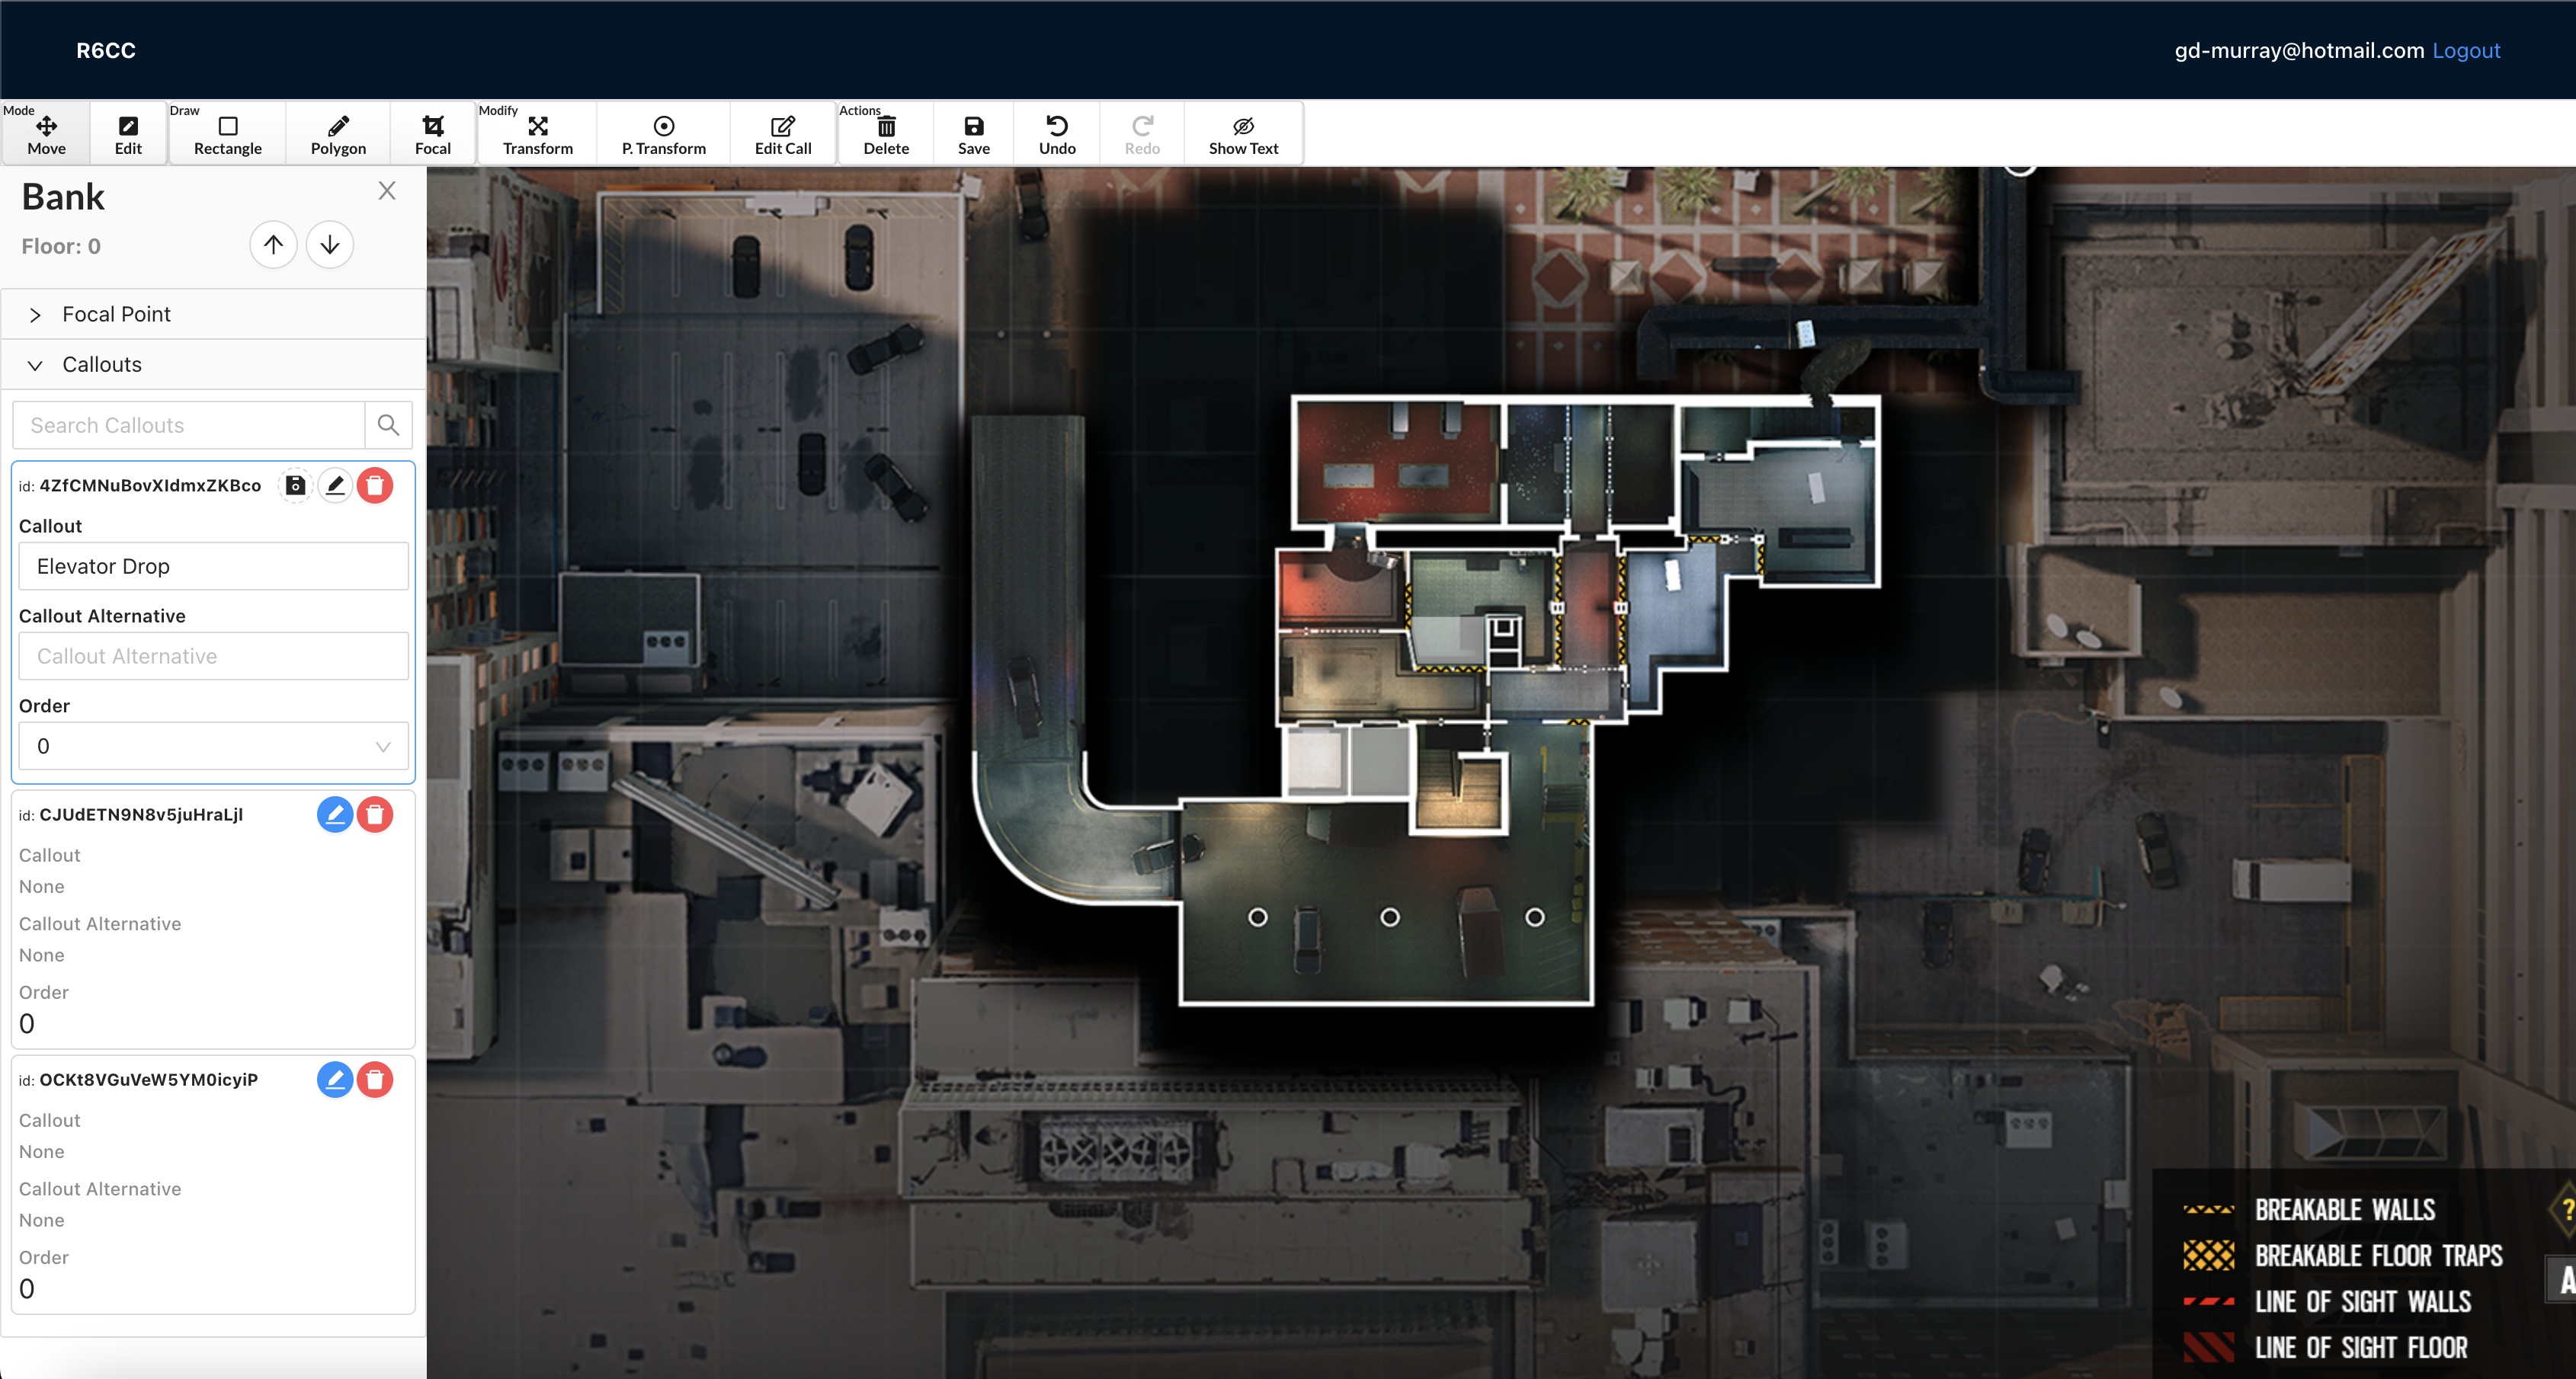 R6CC is a web-based application dedicated to enhancing the strategic gameplay of Rainbow Six Siege players. It allows users to view, edit, and share detailed map callouts, facilitating better communication and strategy planning within the game. The platform supports interactive map viewing and custom callout editing.